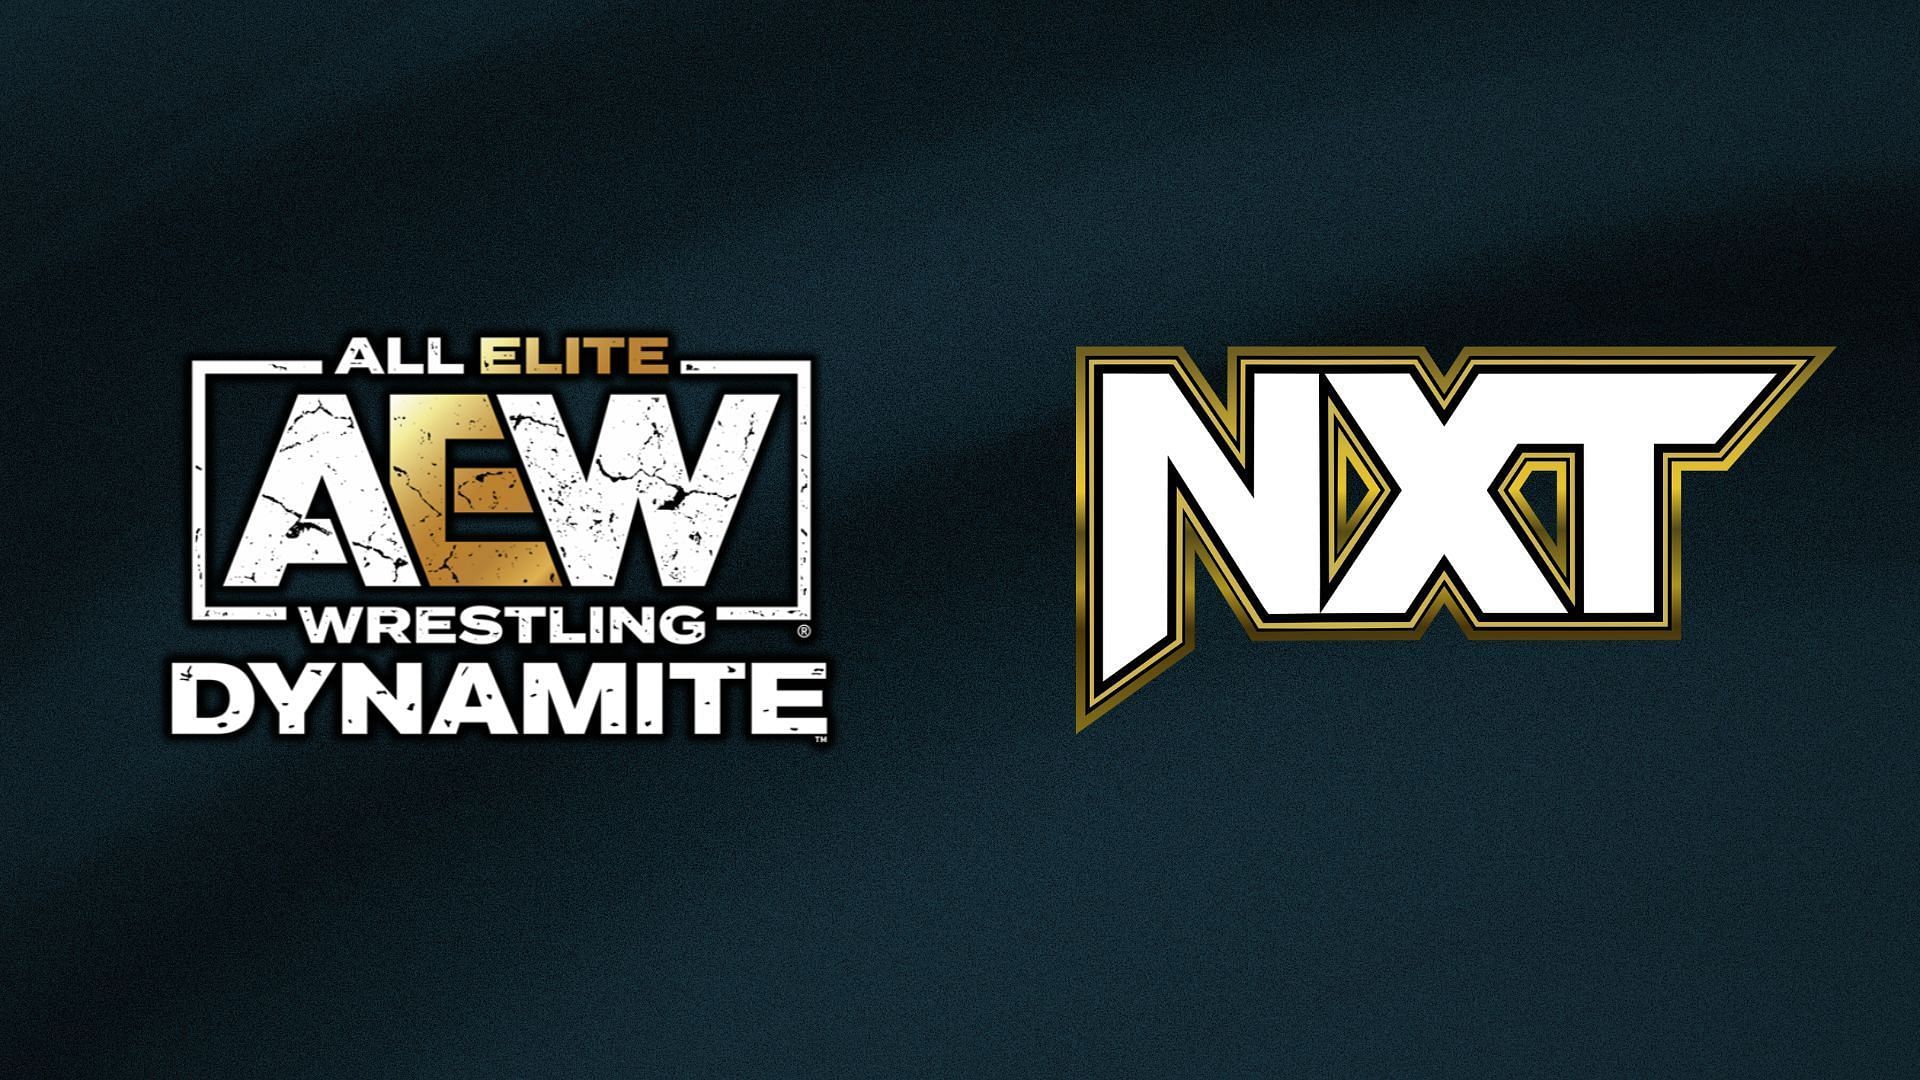 WWE reportedly signed a new TV deal for NXT 